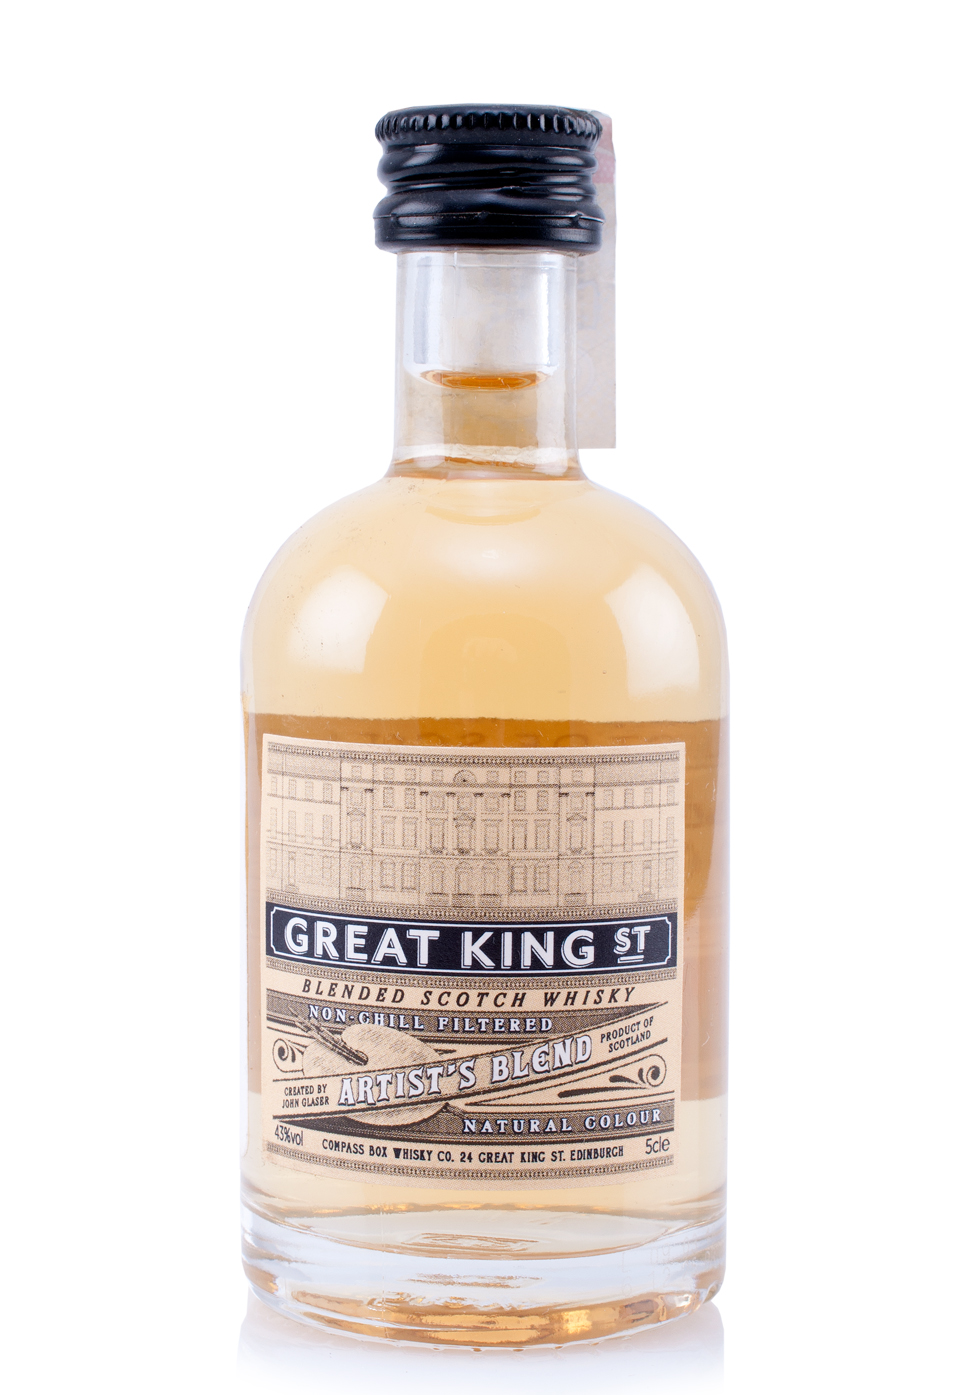 Whisky Great King Street by Compass Box, Artist's Blend (0.05L) Image